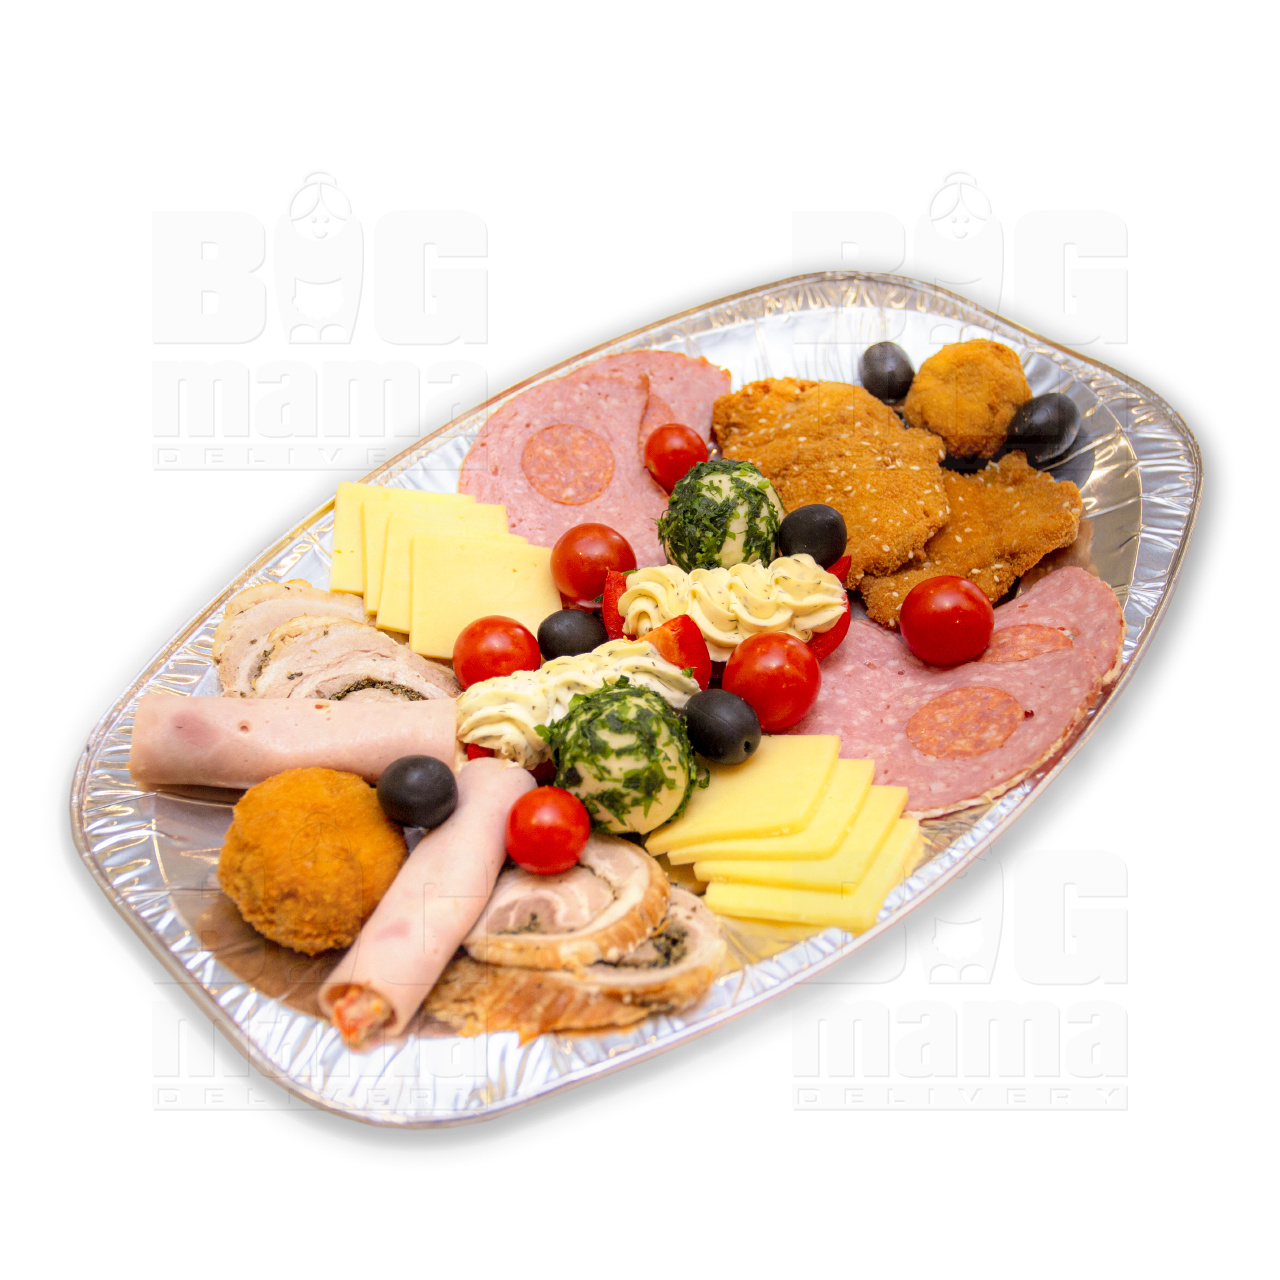 Product #223 image - Cold dish with Viennese chicken schnitzel, 2 pers.